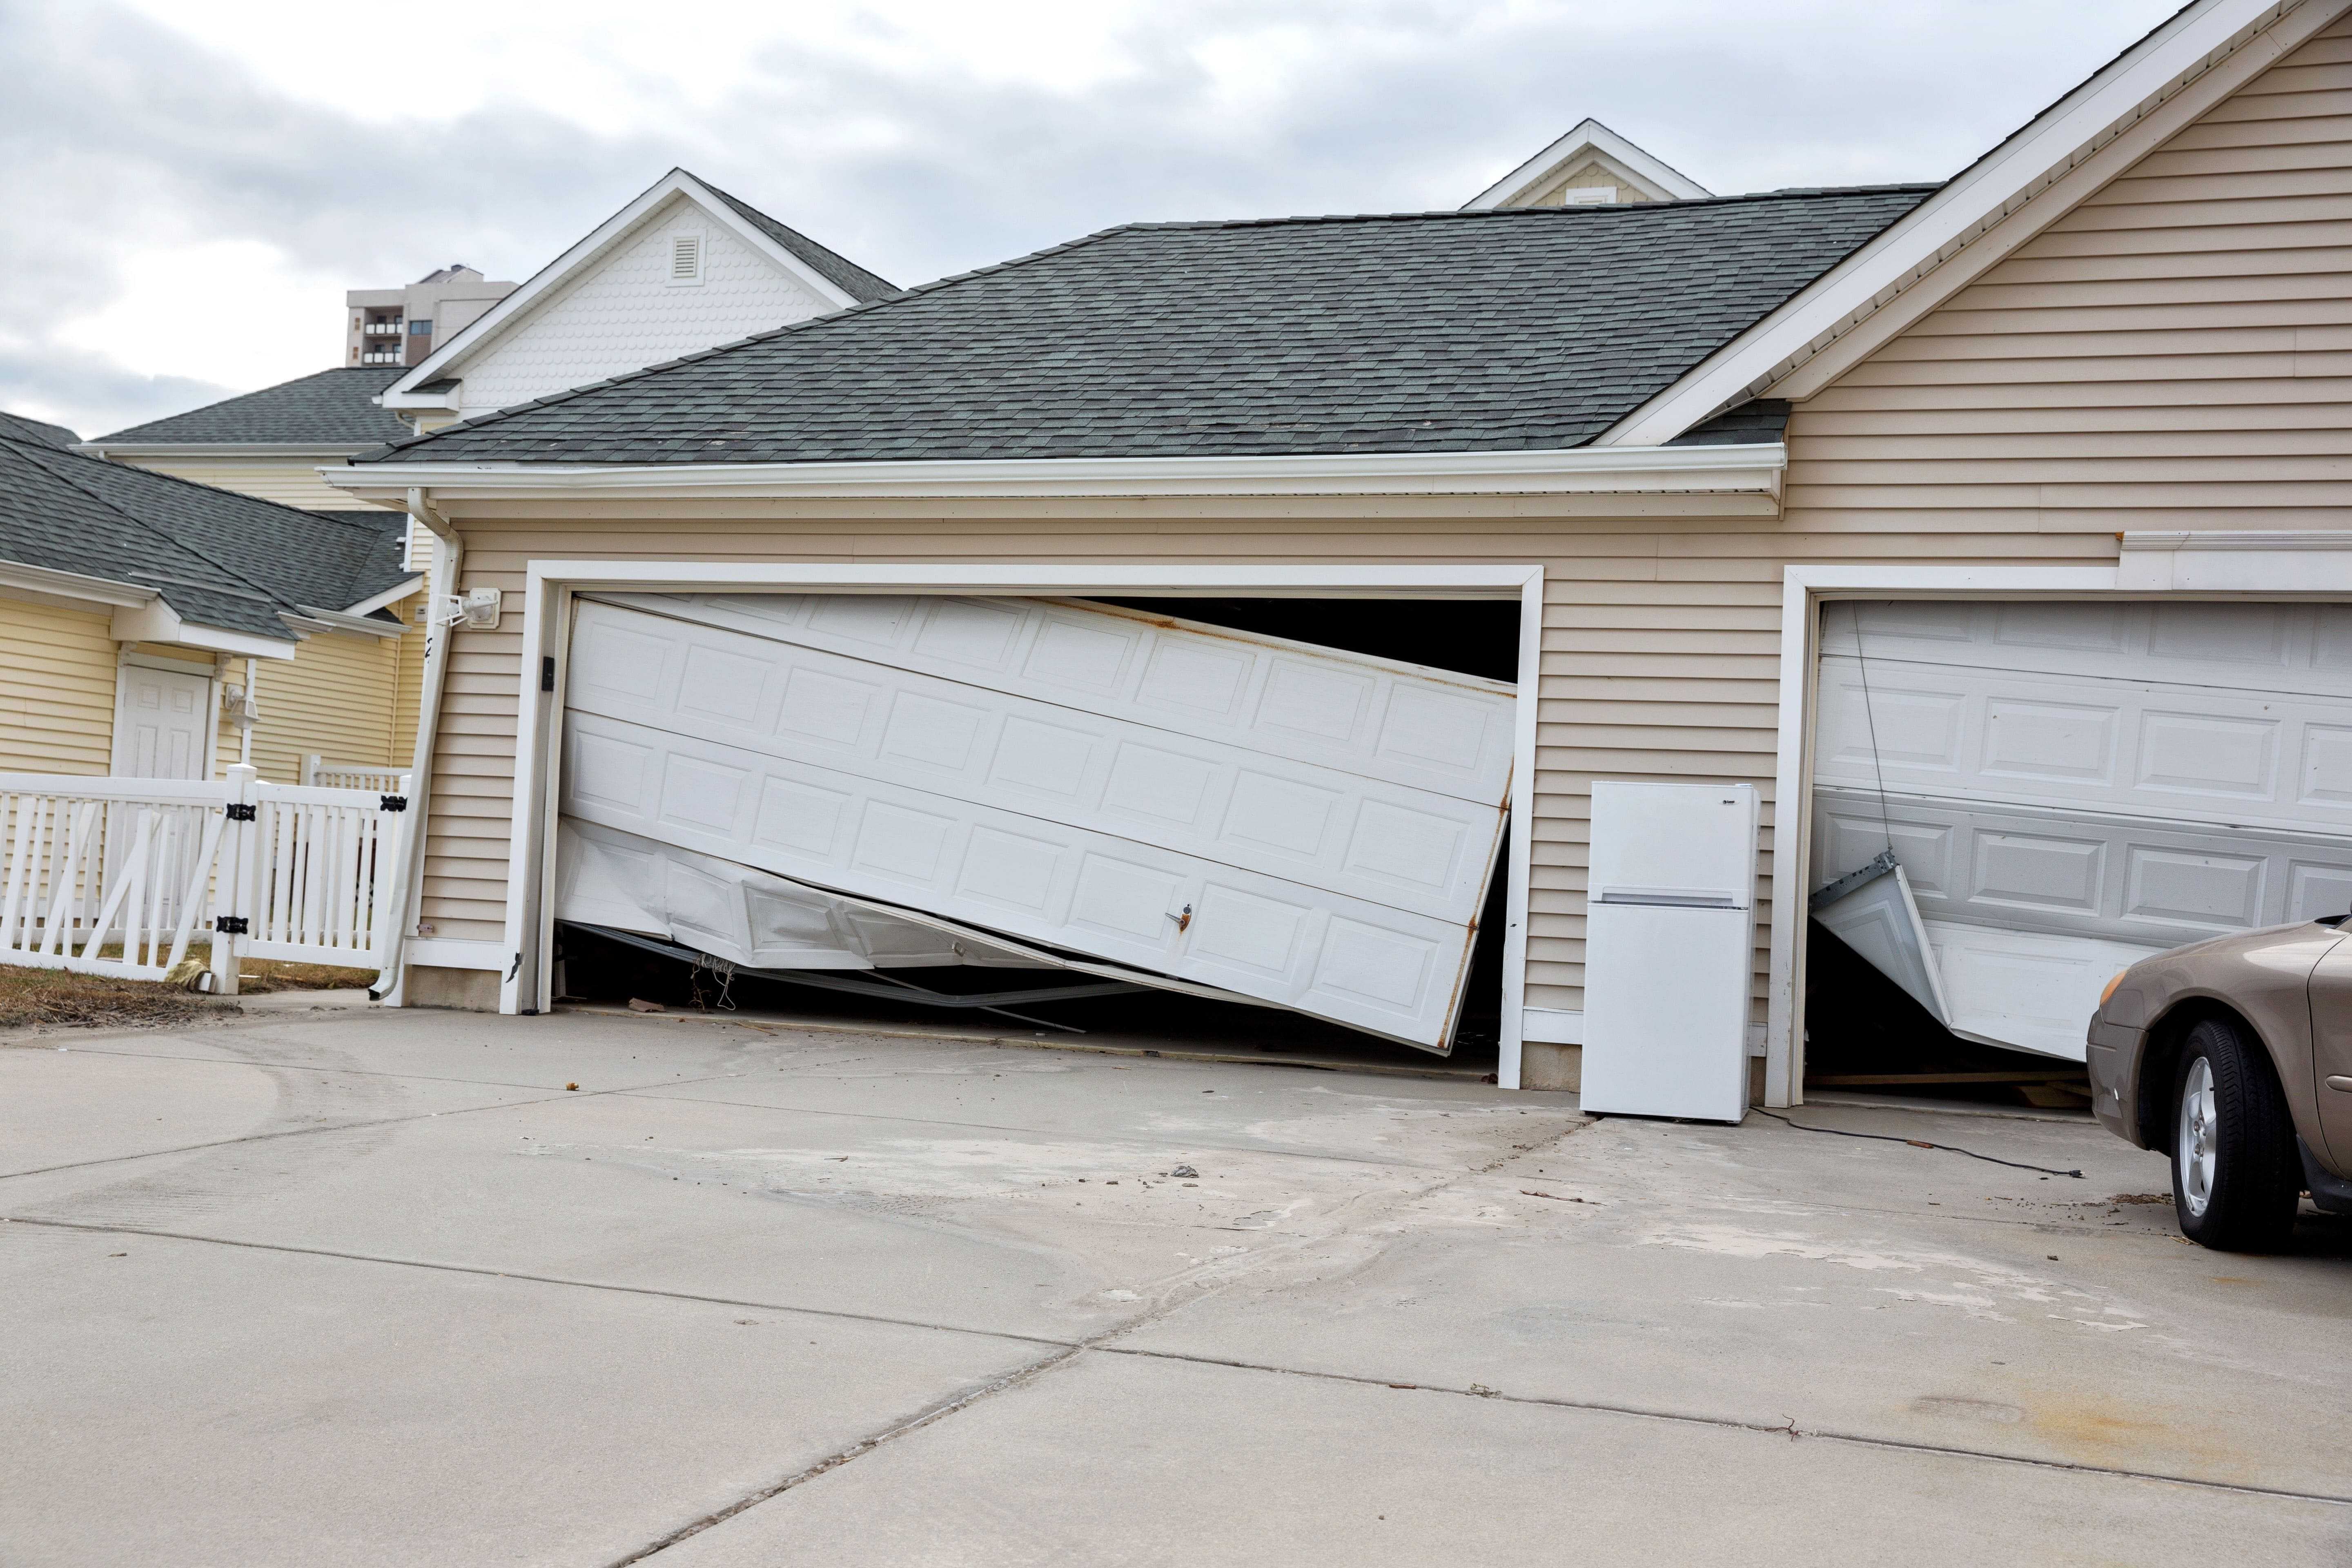 extremely bent garage doors after extreme wind storm